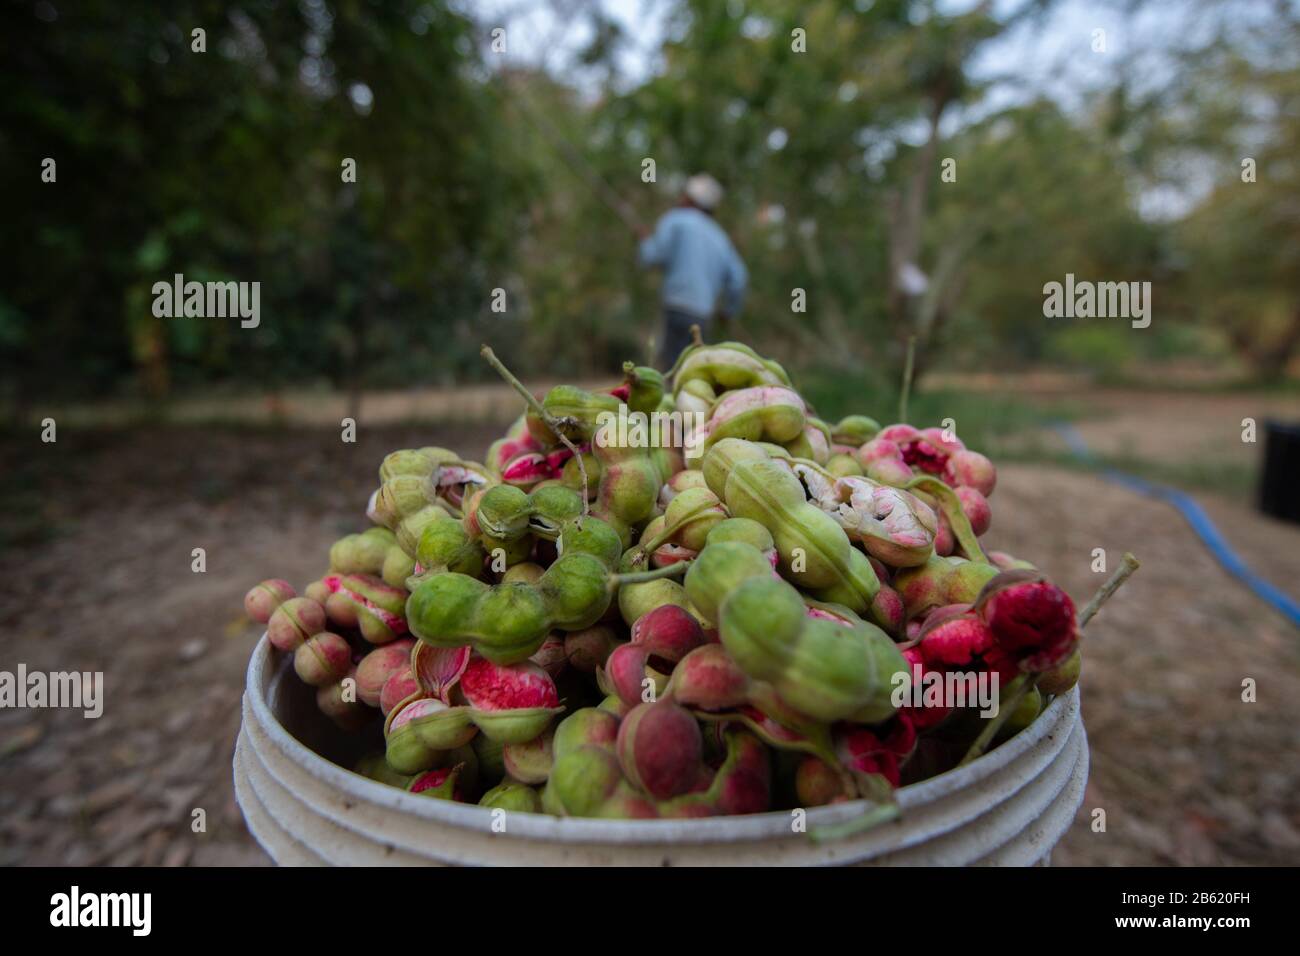 March 1, 2020, Ratchaburi, Thailand: A view of ripe Pithecellobium dulce fruits in a basket..The harvest of the Pithecellobium dulce also known as Madras Thorn is from December to March. (Credit Image: © Vachira Kalong/SOPA Images via ZUMA Wire) Stock Photo